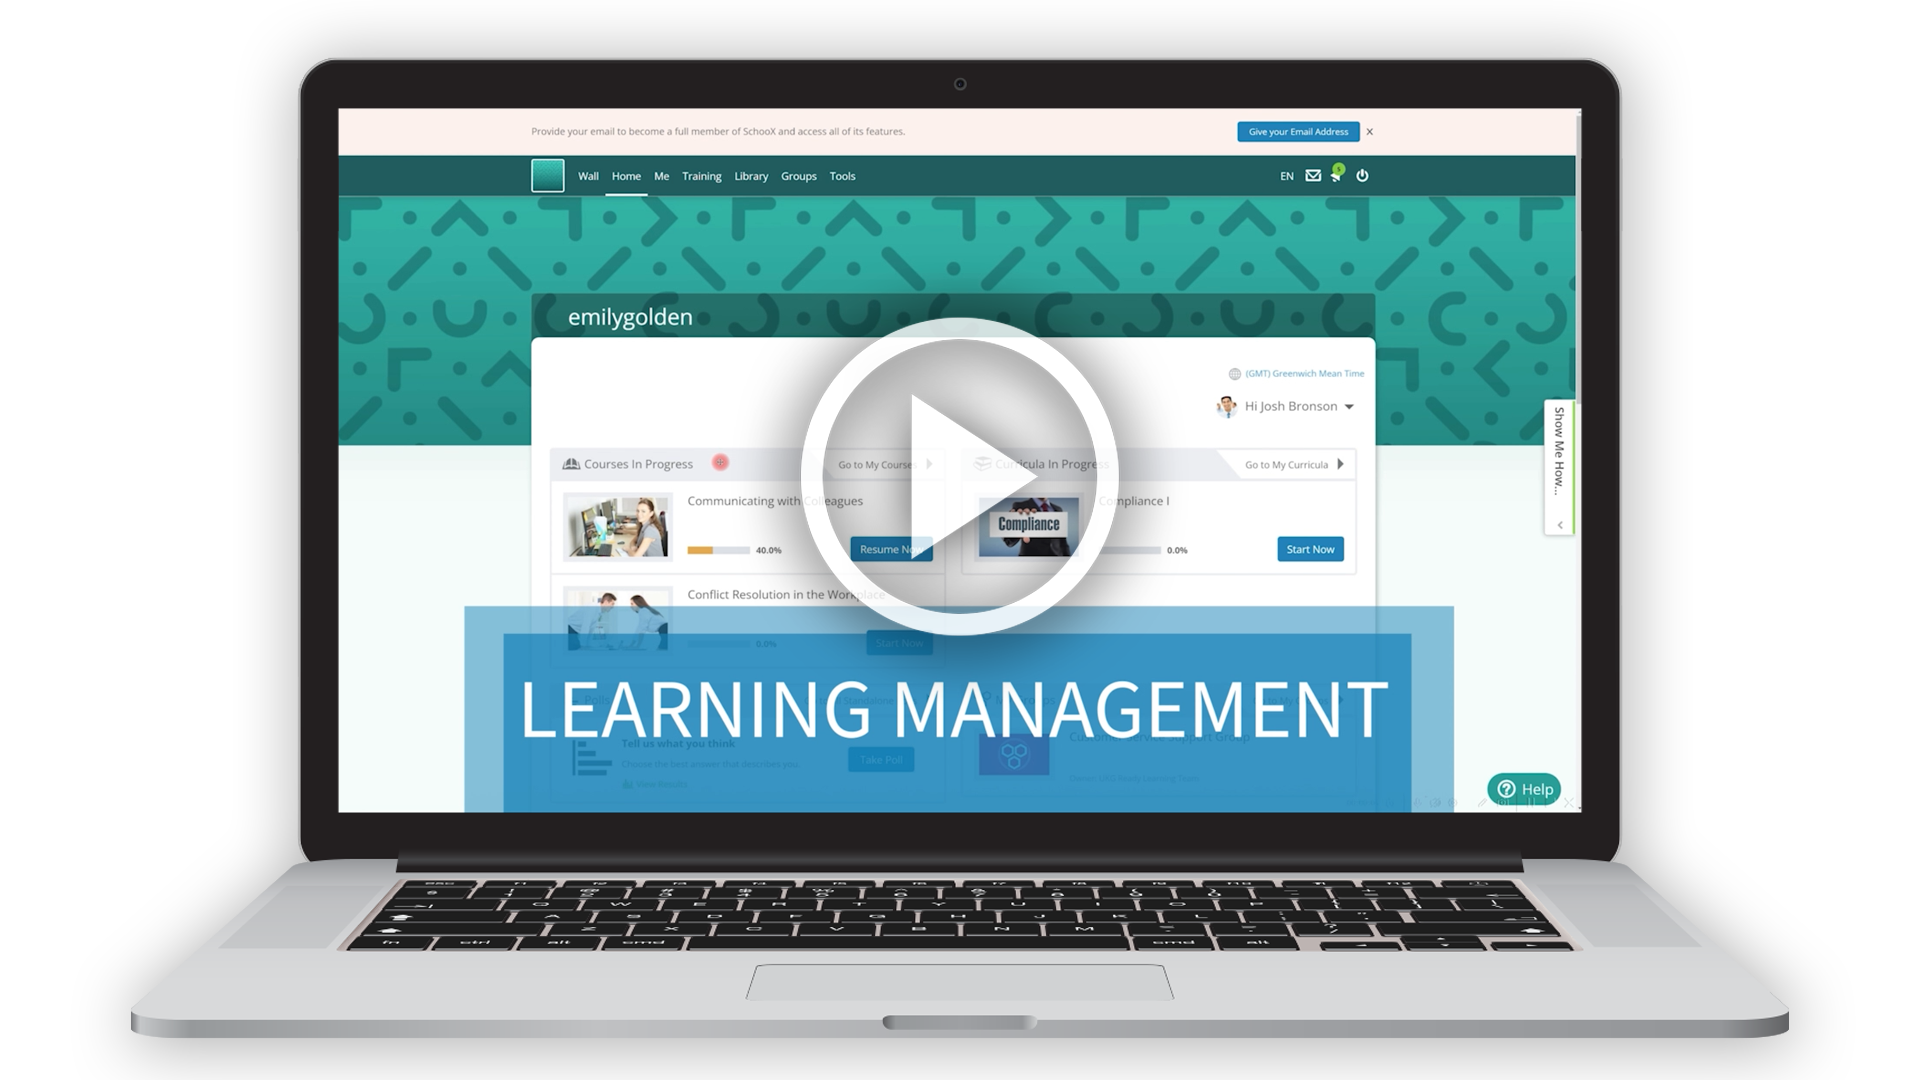 Learning Management Demo Video